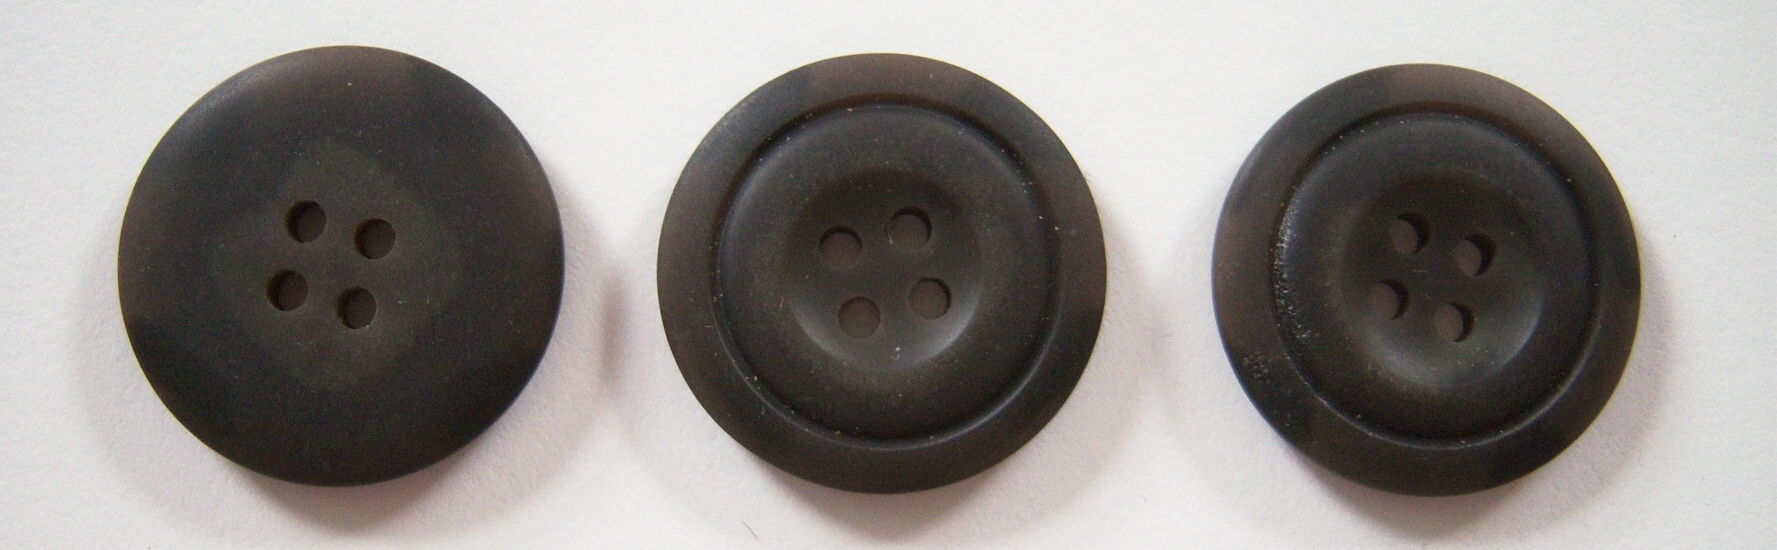 Taupe/Grey 1" 2 Hole Button